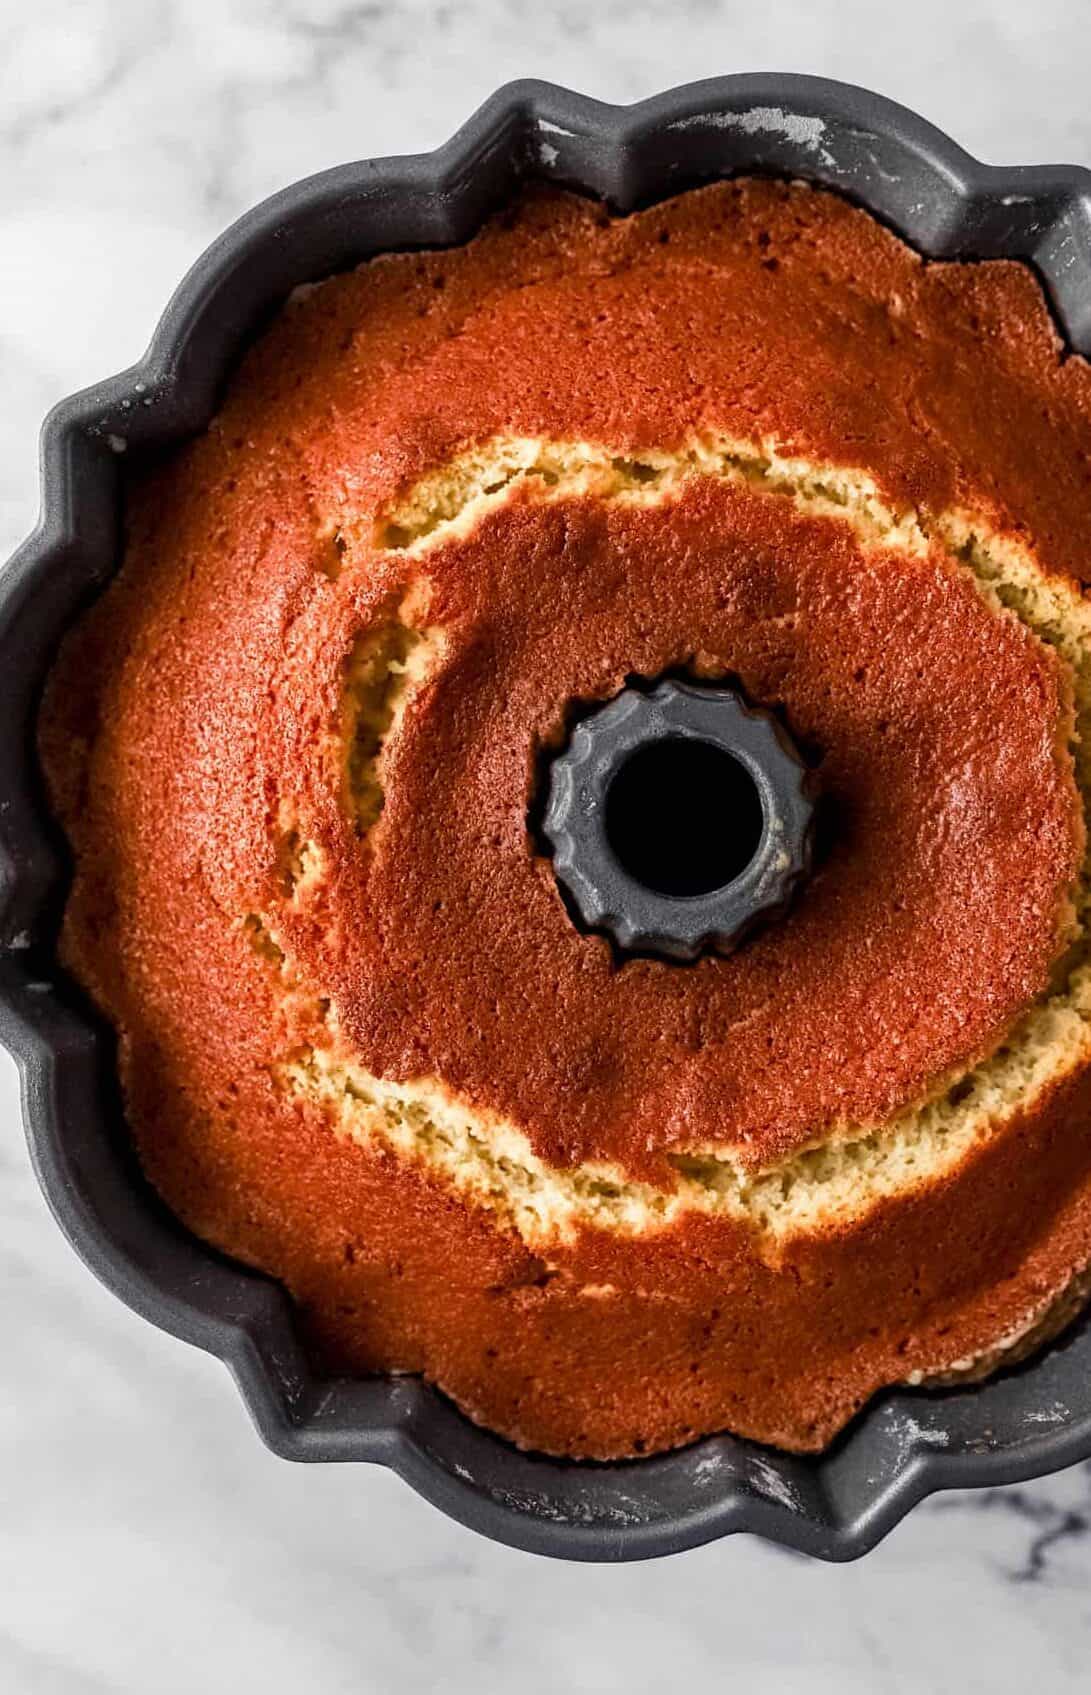 Overhead view of baked cake in pan.